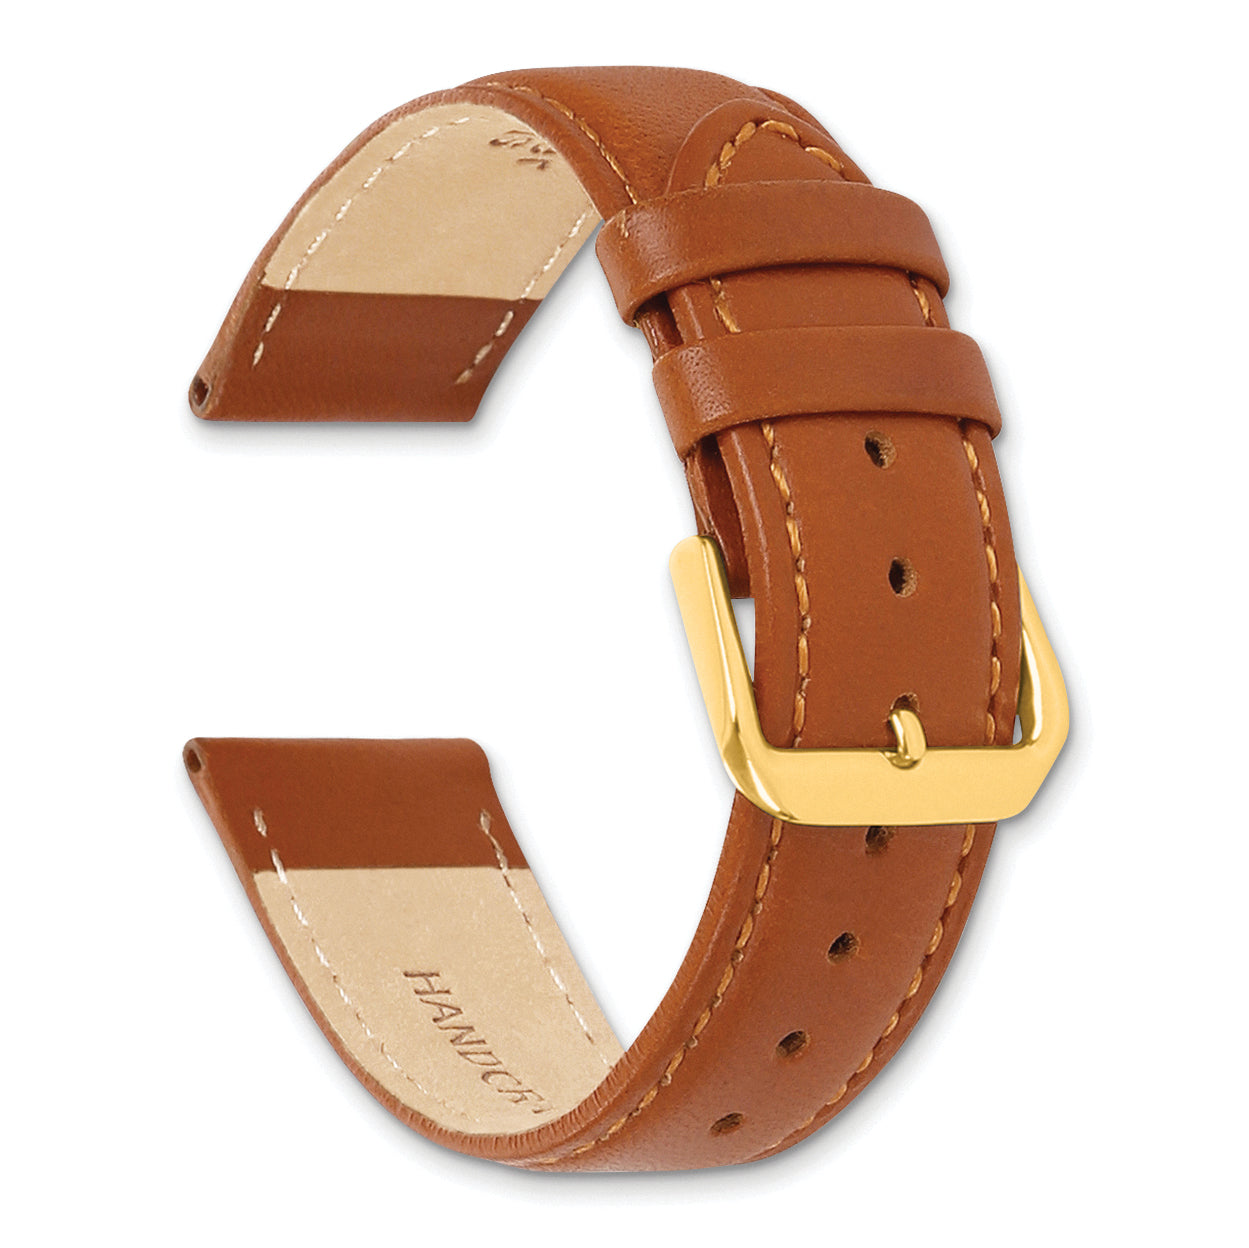 14mm Havana Italian Leather with Gold-tone Buckle 6.75 inch Watch Band